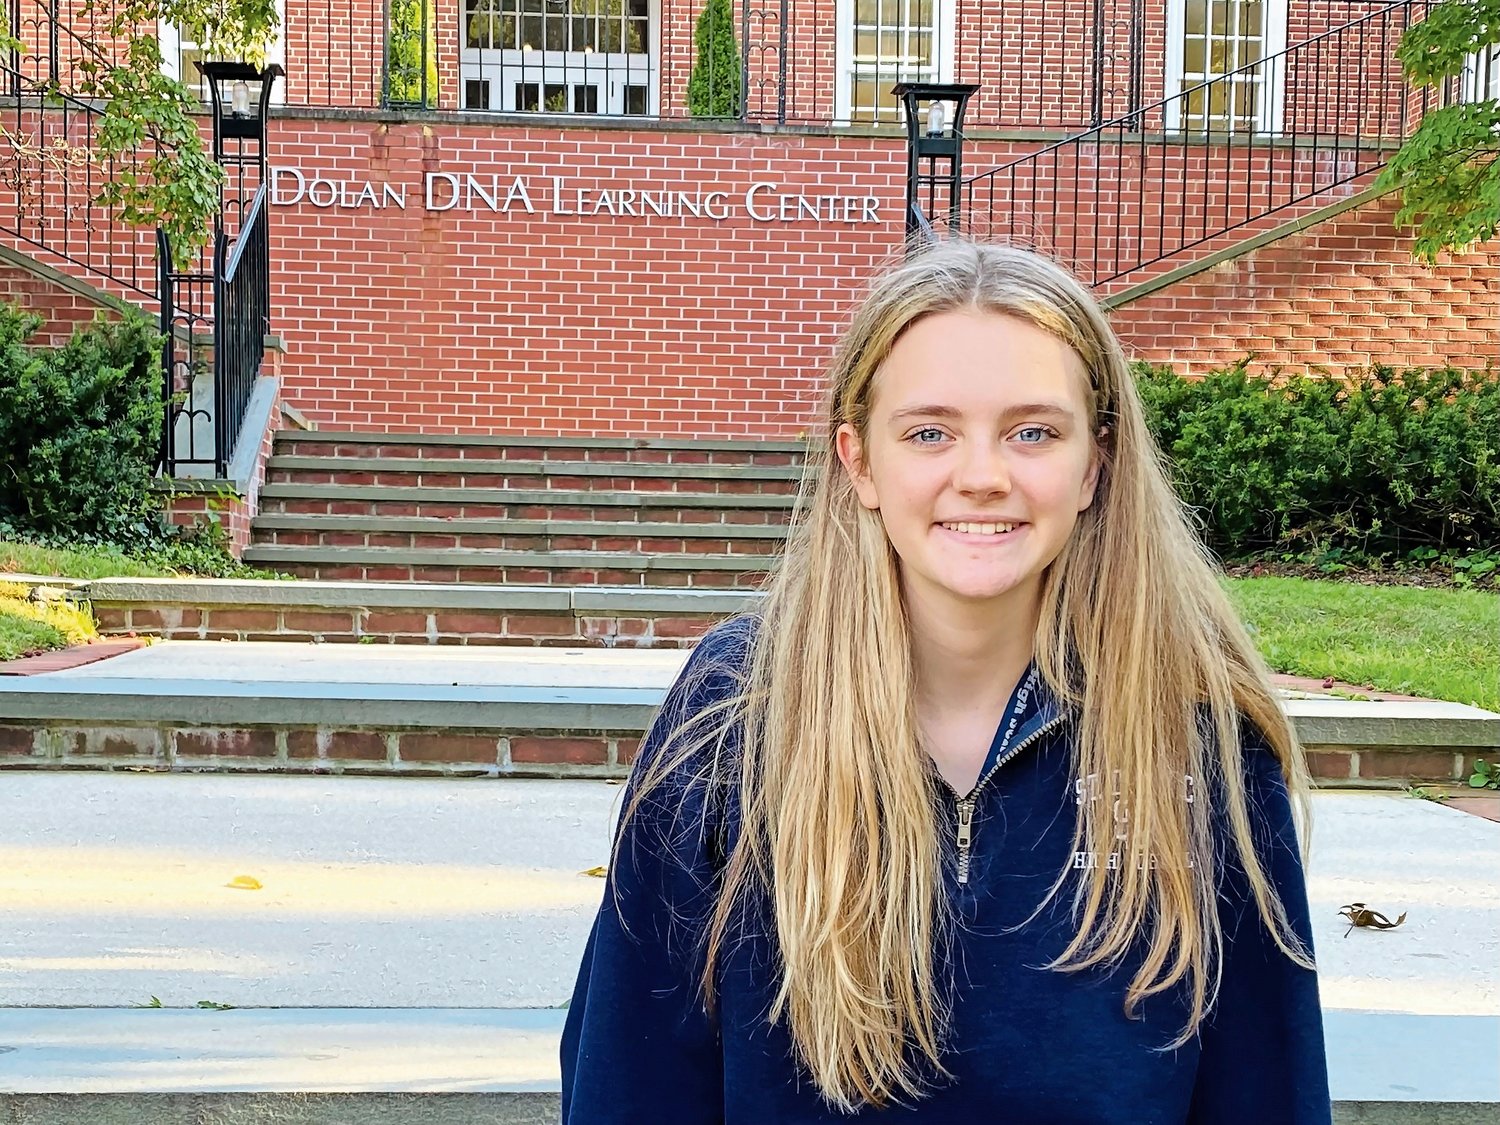 Croi Spillane, a student at St. Dominic High School, was chosen to intern at the Cold Spring Harbor Laboratory DNA Lab Learning Center.